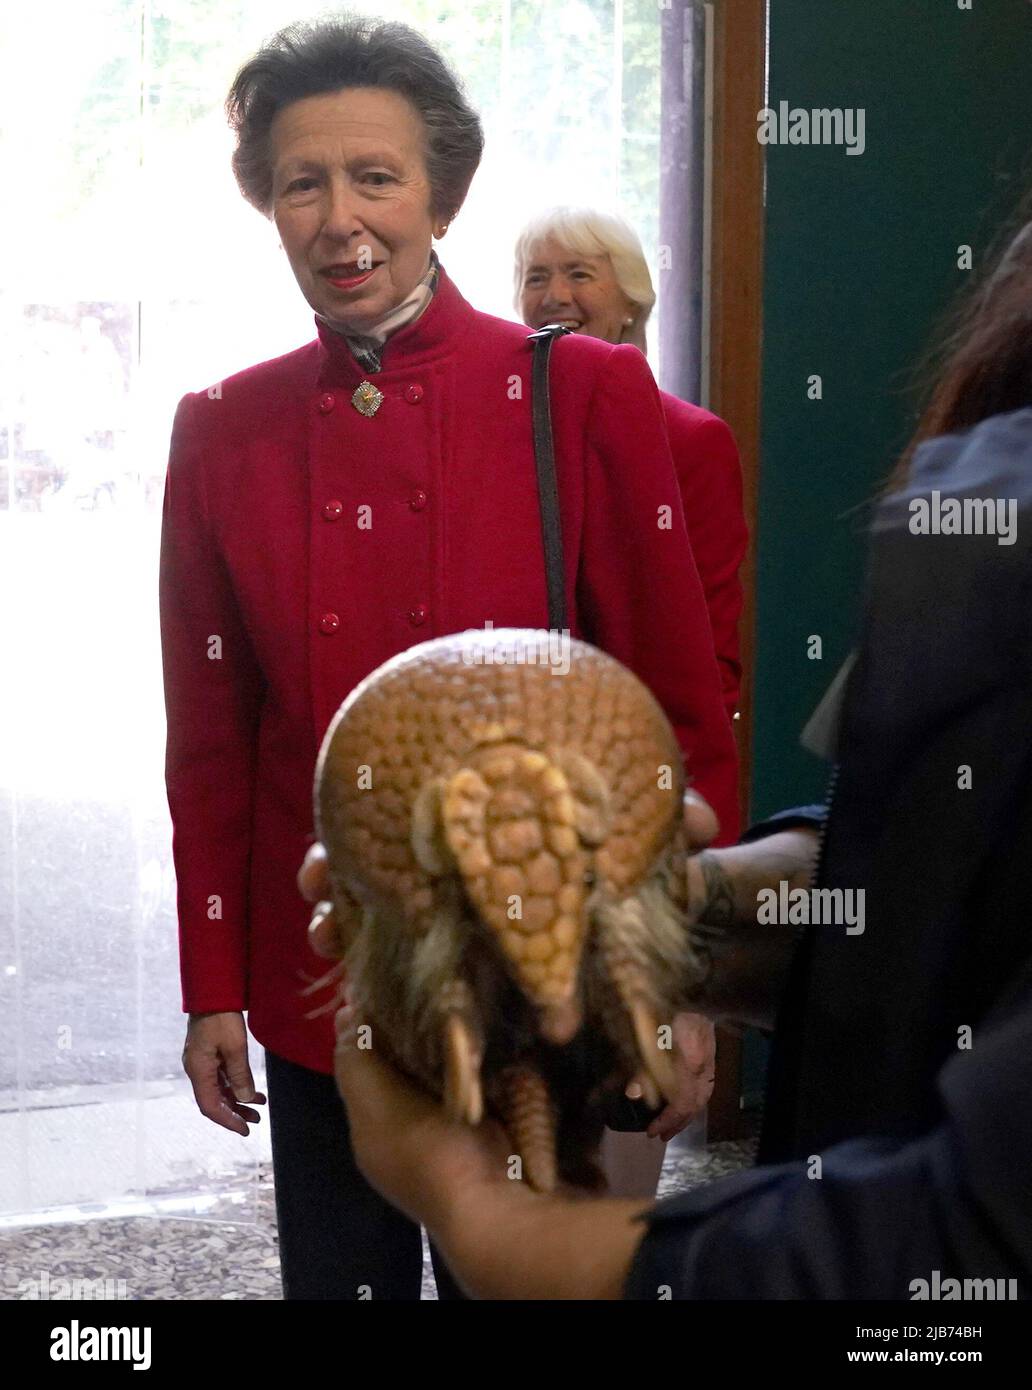 The Princess Royal views an armadillo during her visit to Edinburgh Zoo, as members of the Royal Family visit the nations of the UK to celebrate Queen Elizabeth II's Platinum Jubilee. Picture date: Friday June 3, 2022. Stock Photo